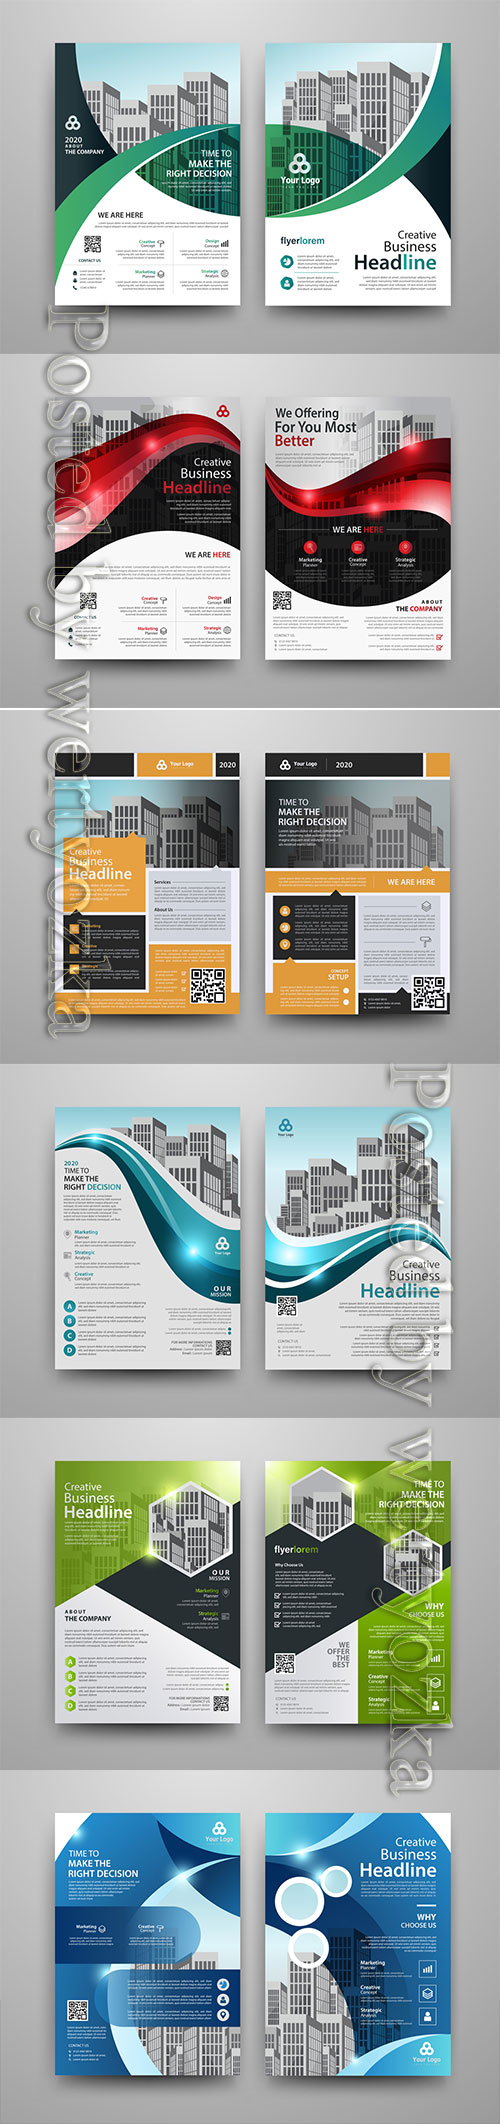 Business vector template for brochure, annual report, magazine # 13